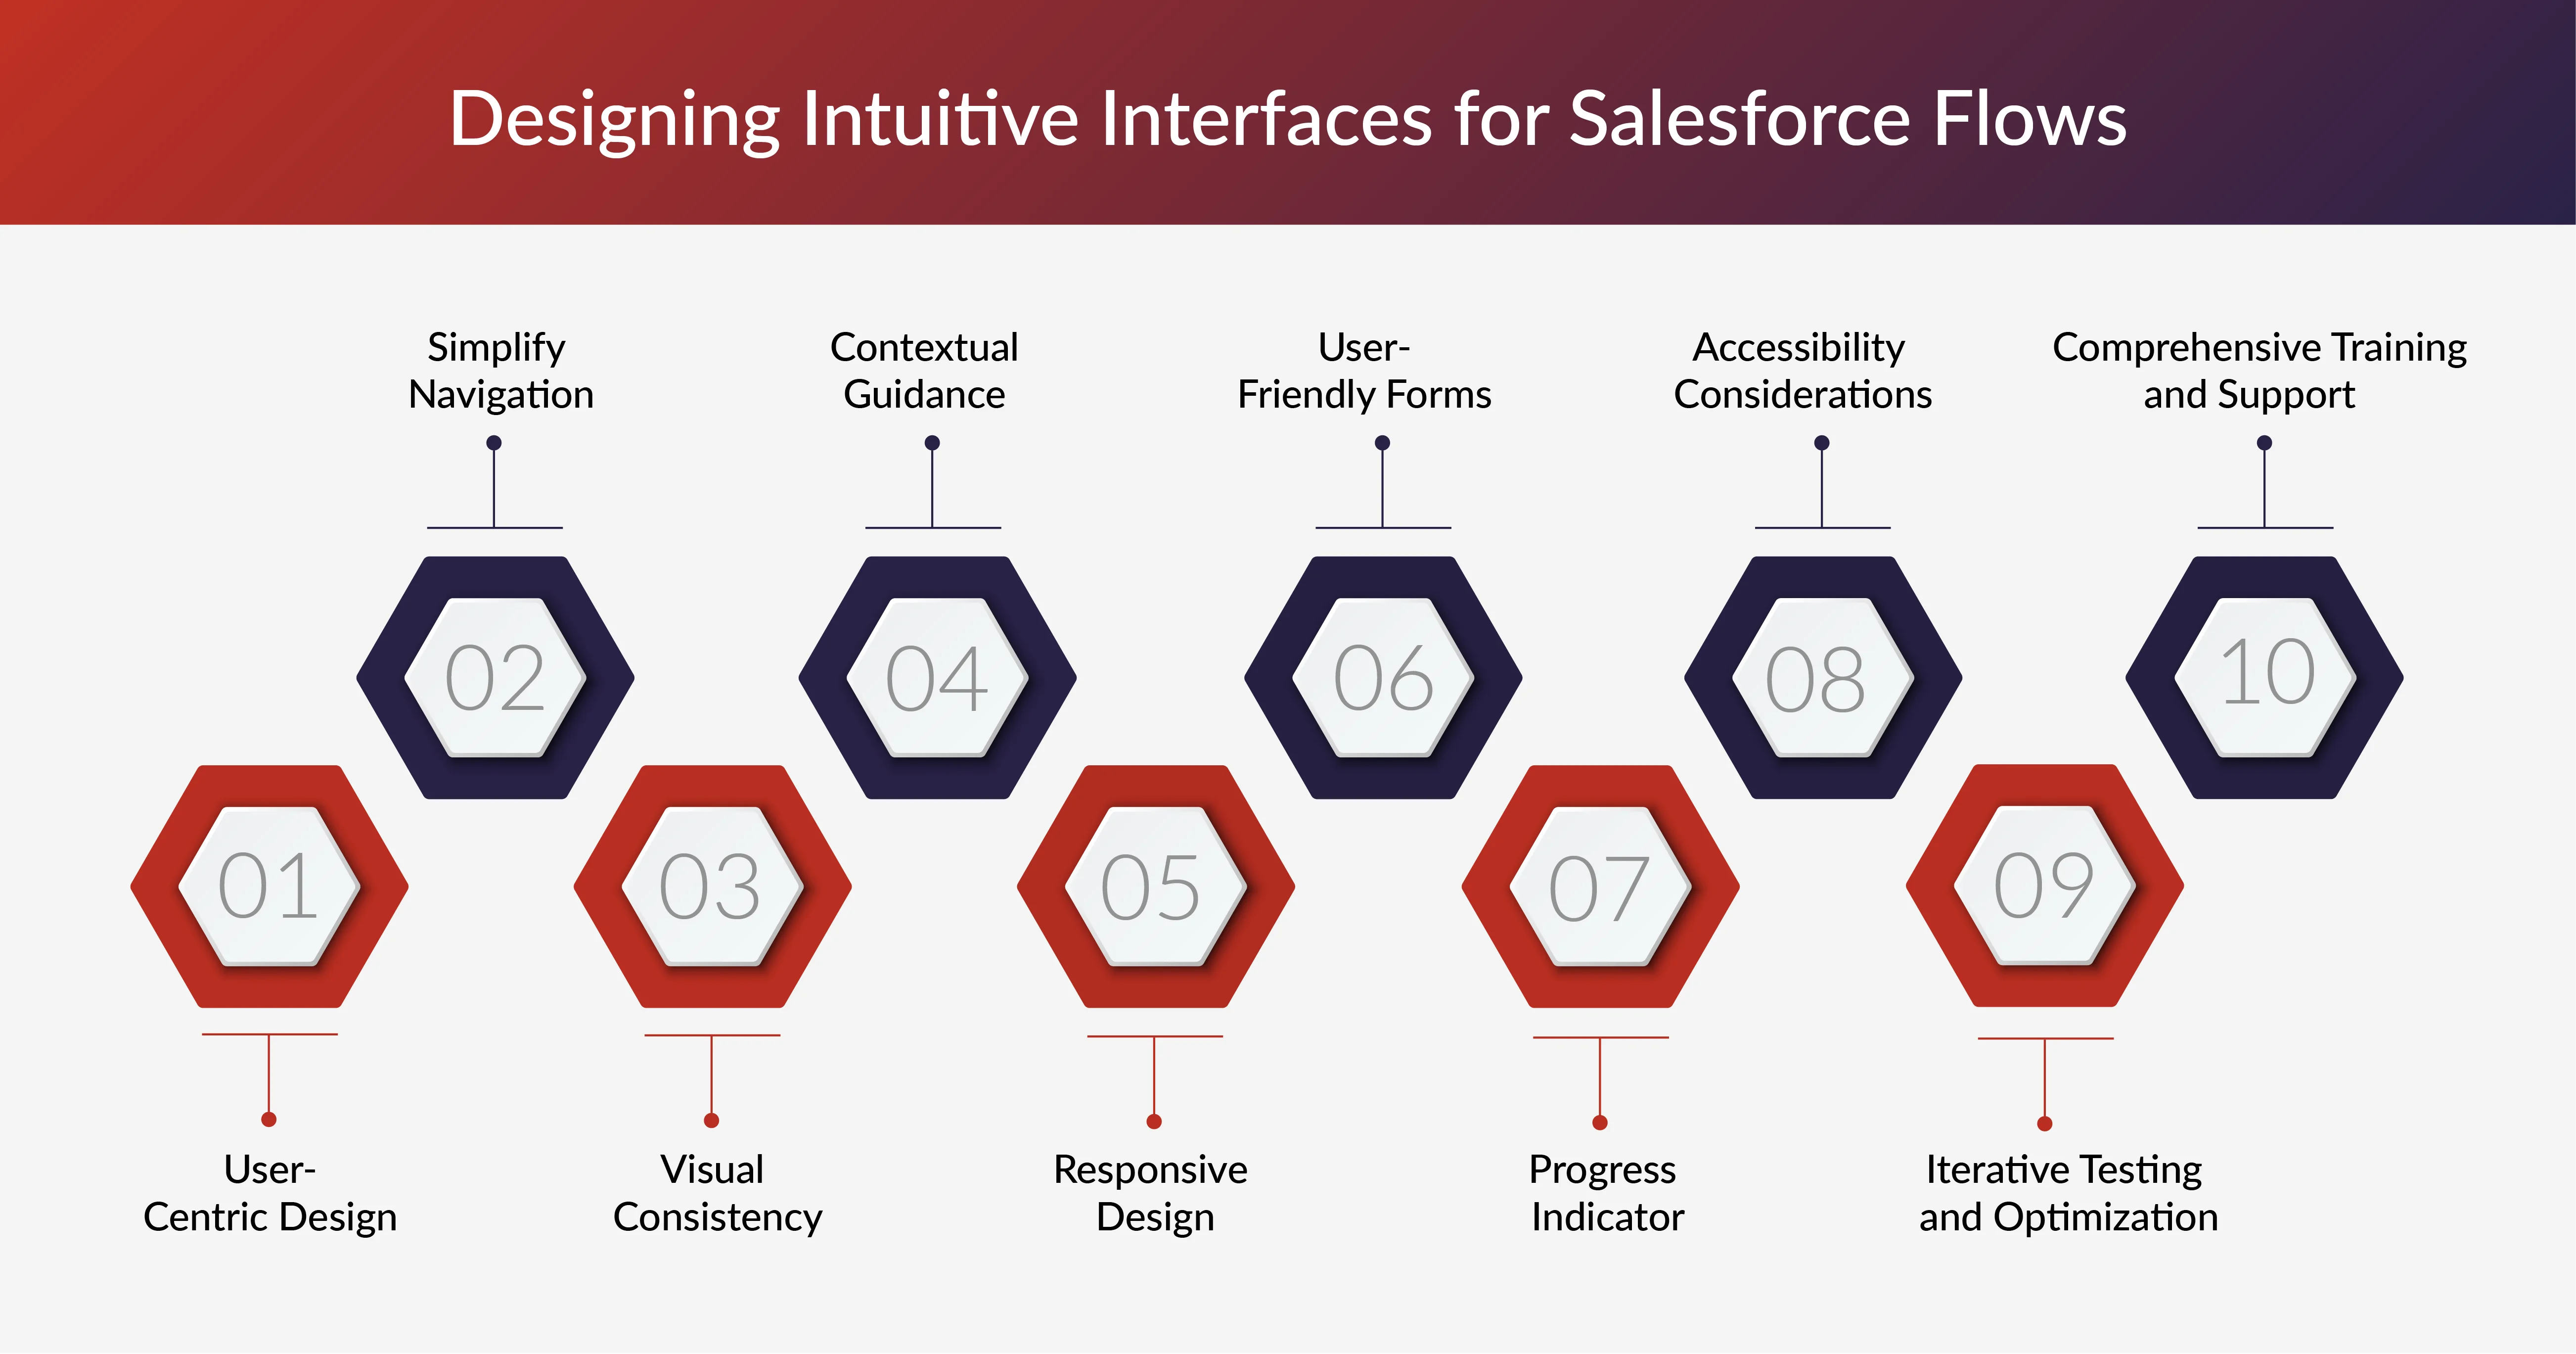 Designing Intuitive Interfaces for Salesforce Flows